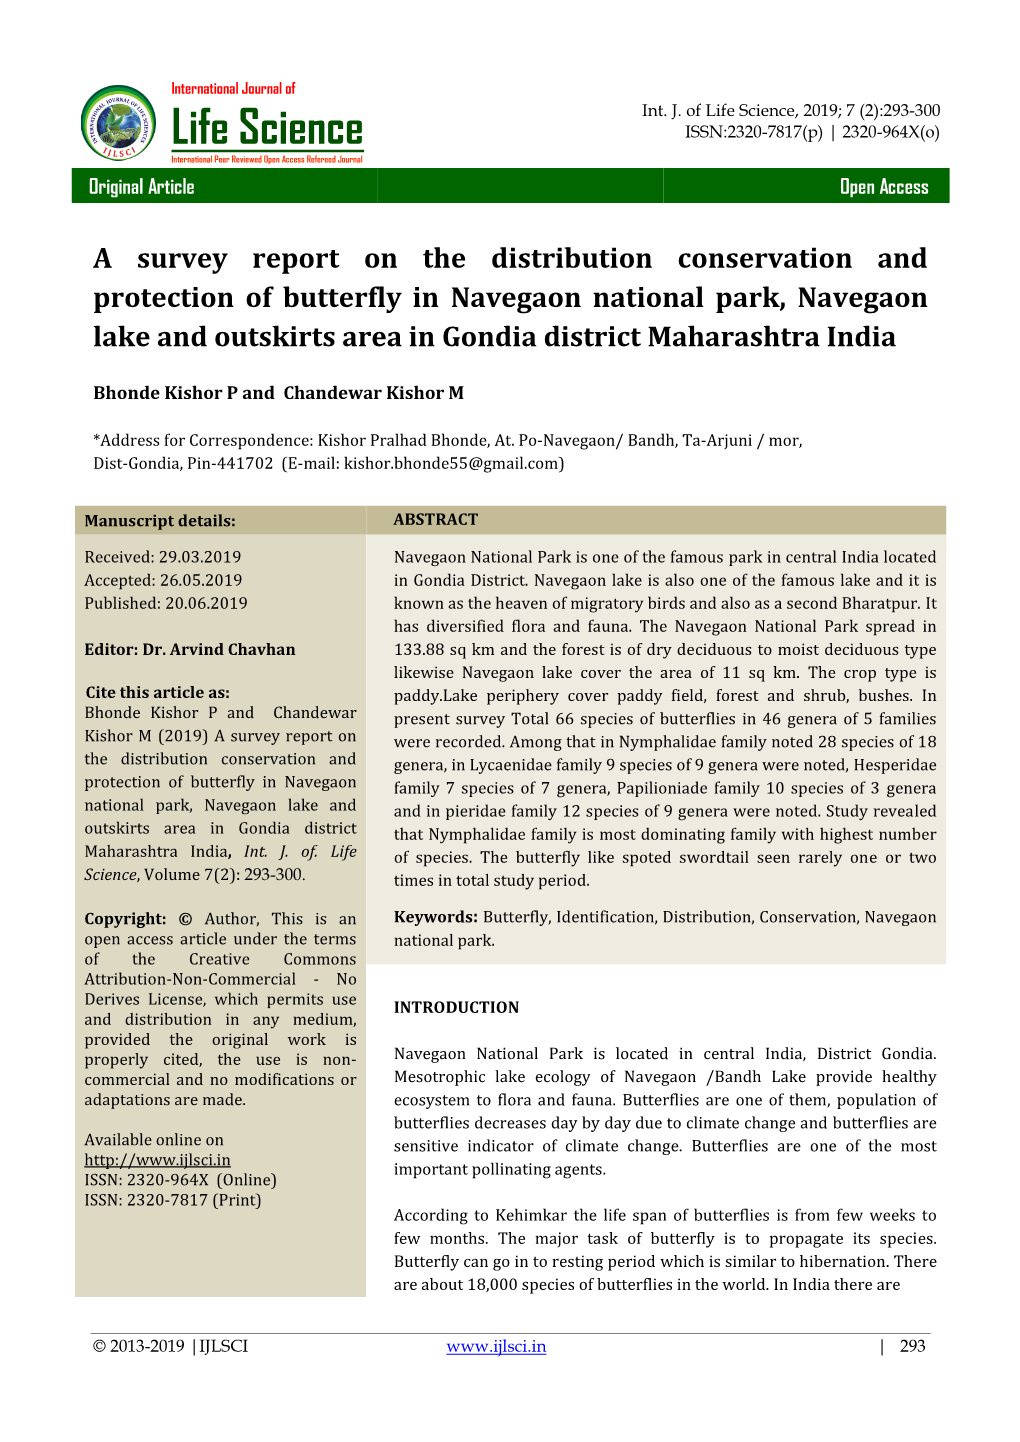 A Survey Report on the Distribution Conservation and Protection Of